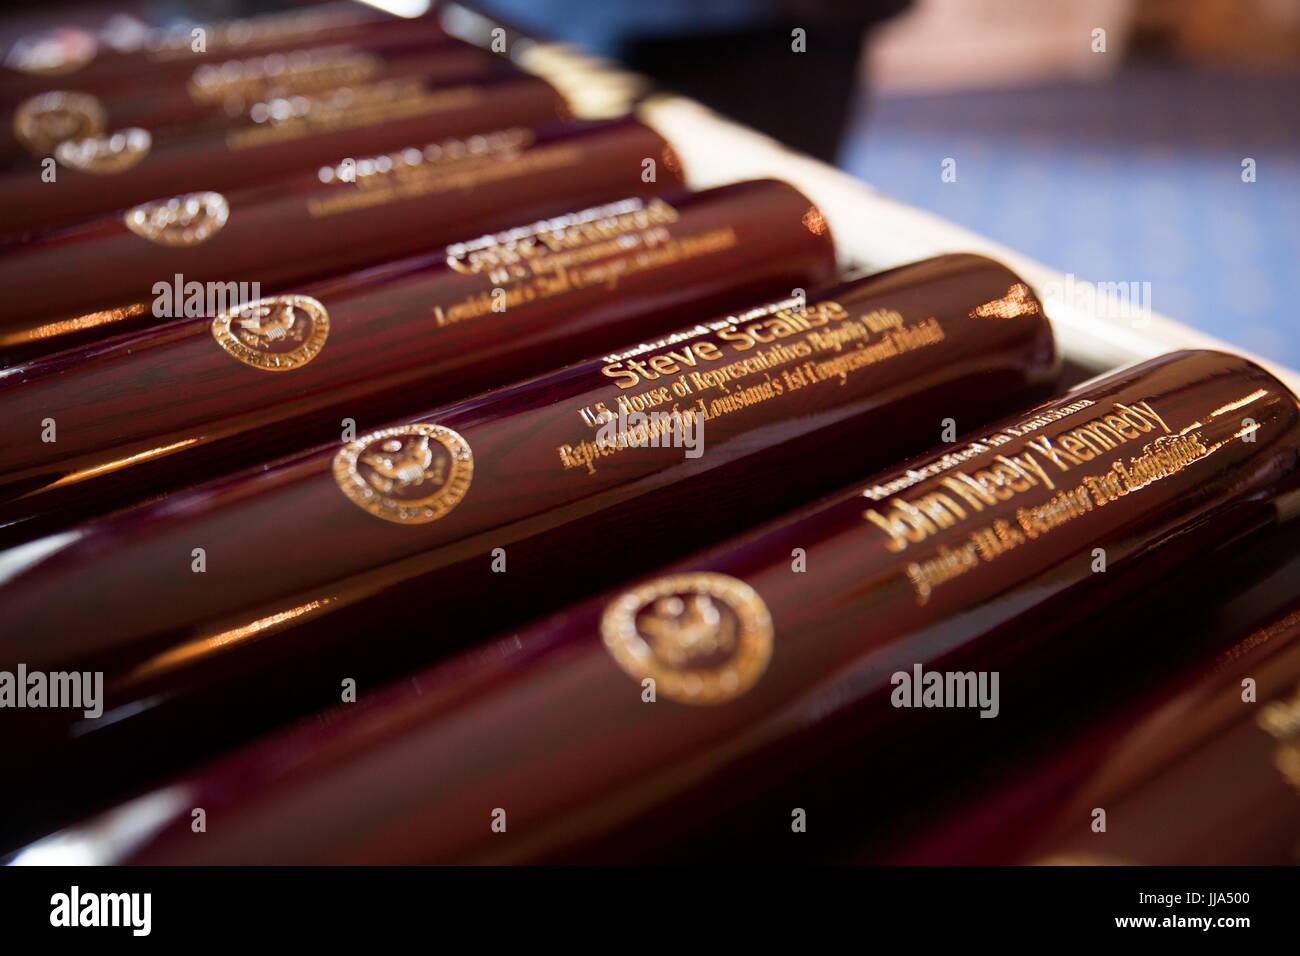 Washington, United States Of America. 18th July, 2017. U.S made Marucci baseball bats engraved for members of Congress on display during a Made in America product showcase featuring items created in each of the 50 states in the Blue Room of the White House July 17, 2017 in Washington, DC. Credit: Planetpix/Alamy Live News Stock Photo